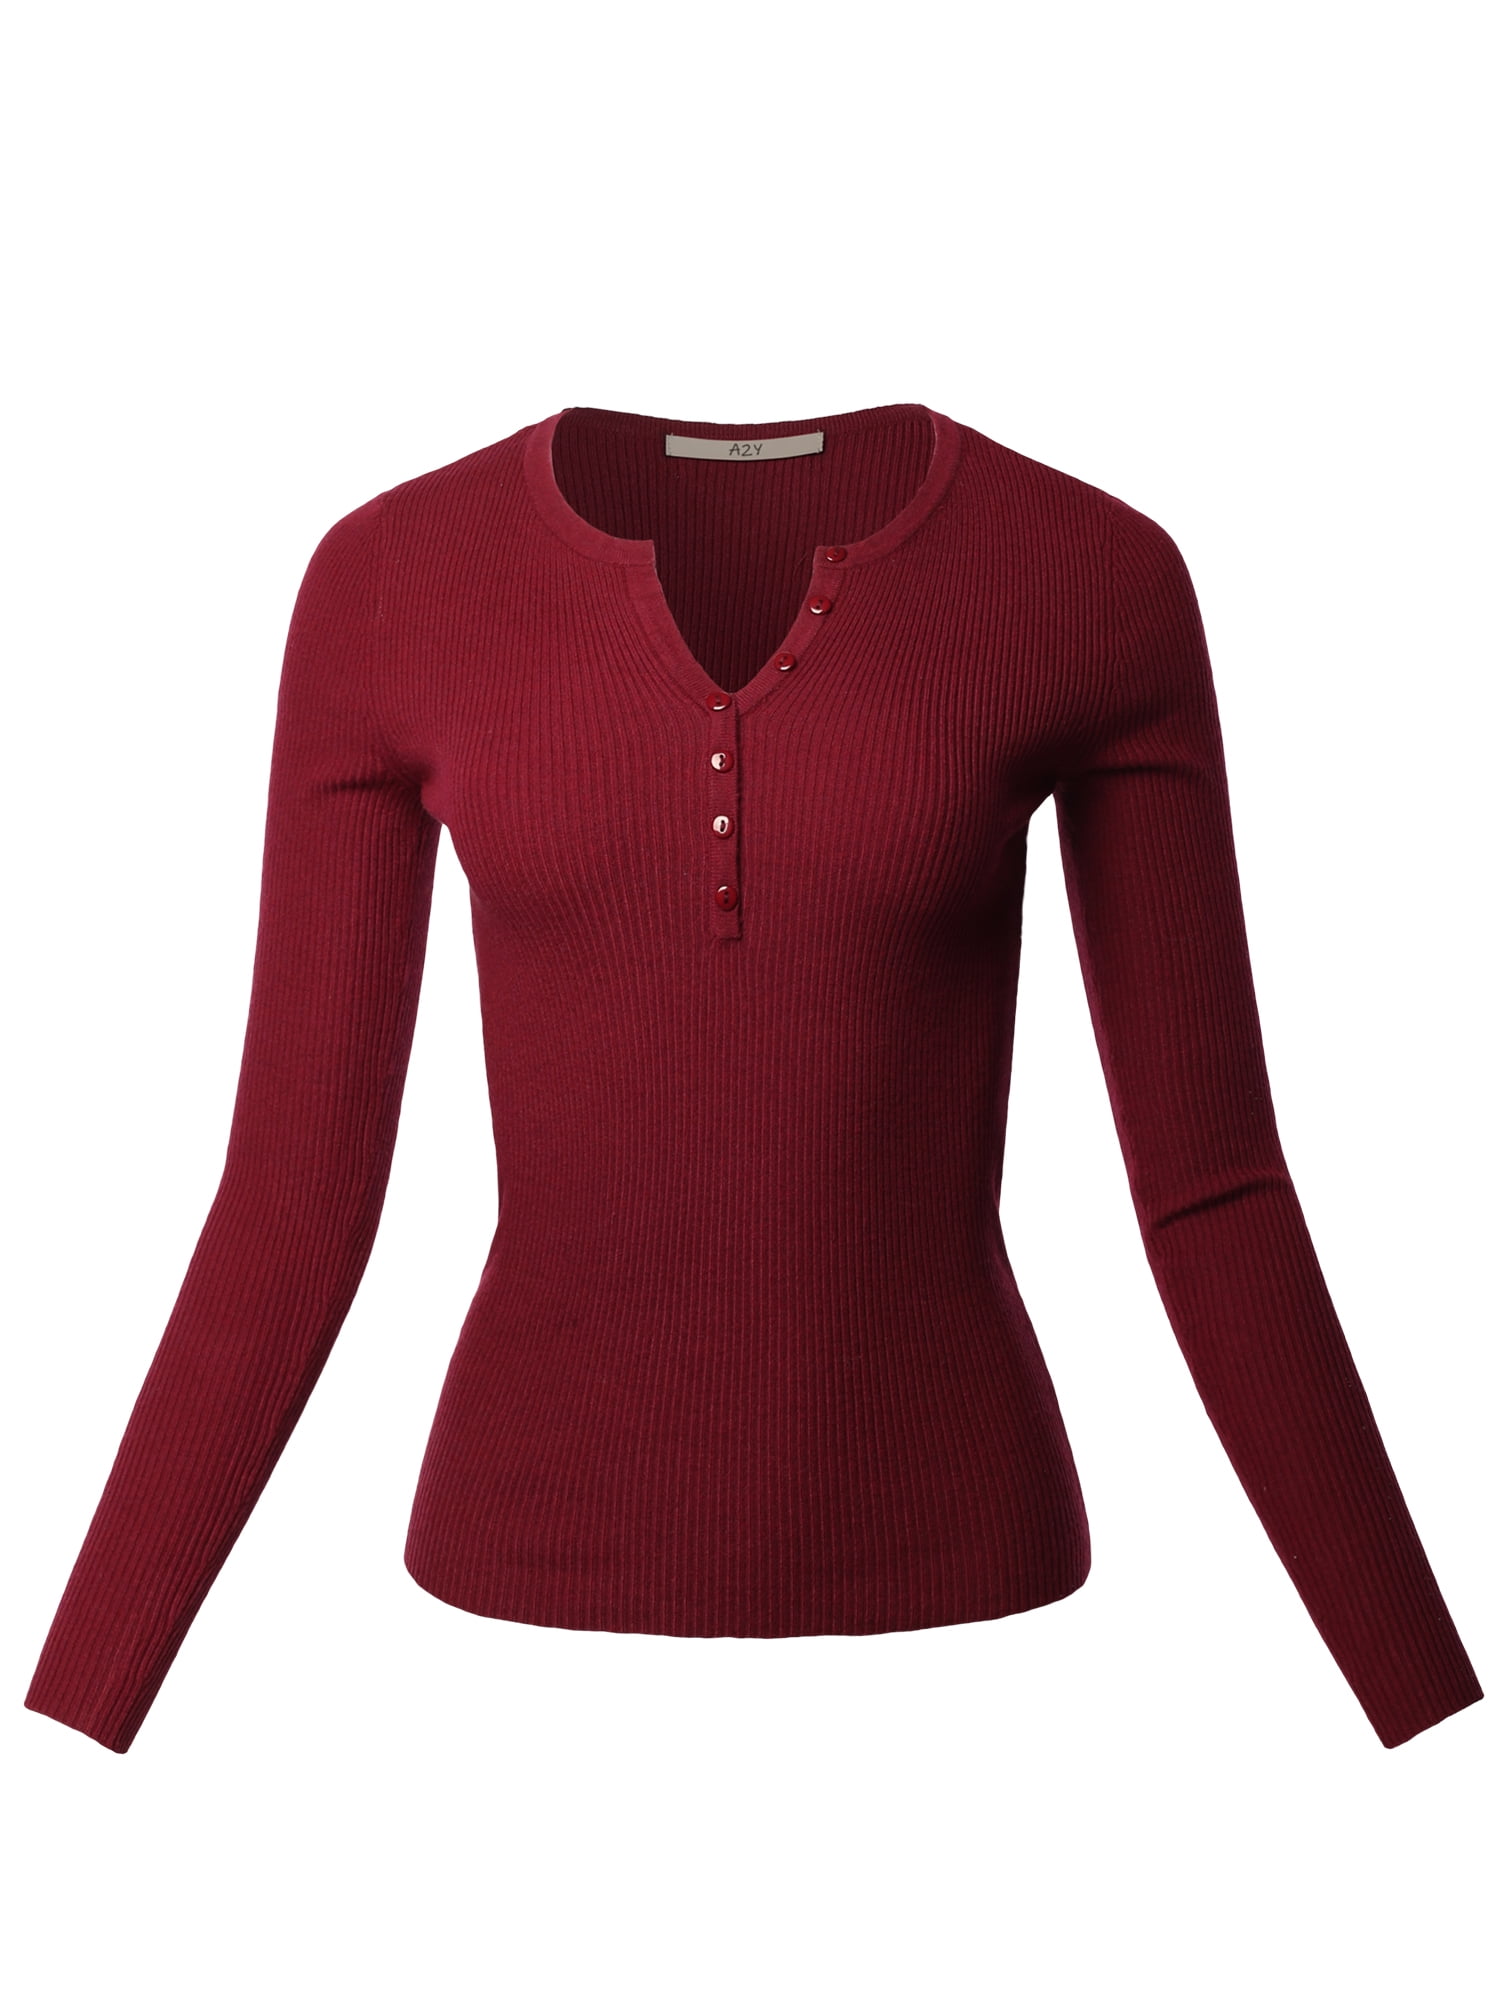 A2Y Women's Fitted Ribbed Long Sleeve Henley Sweater Burgundy M ...